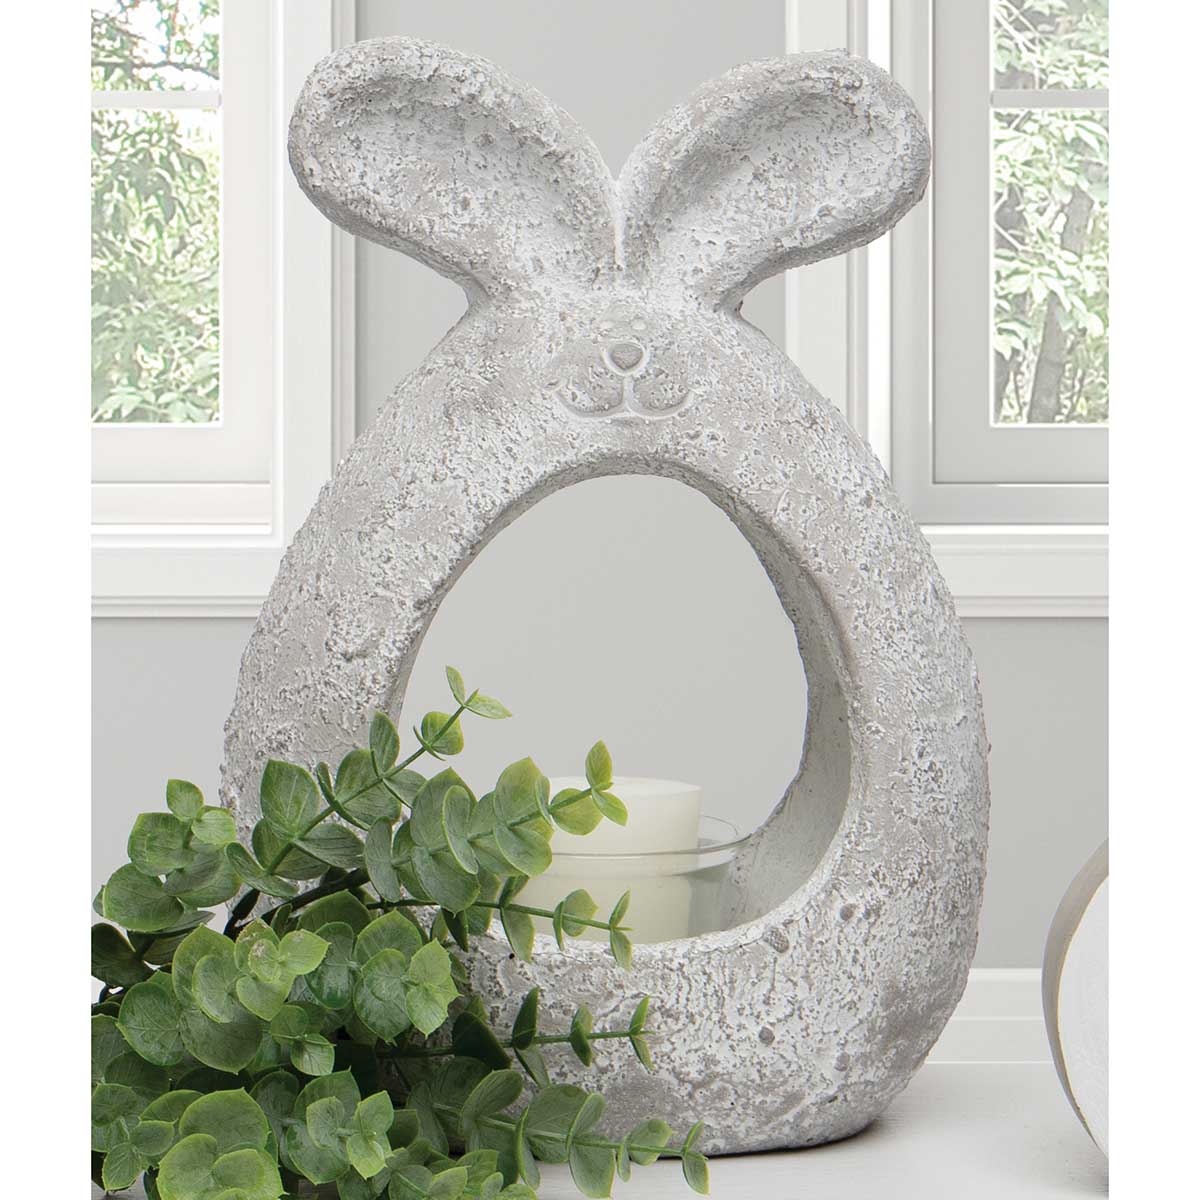 Bunny Planter with hole